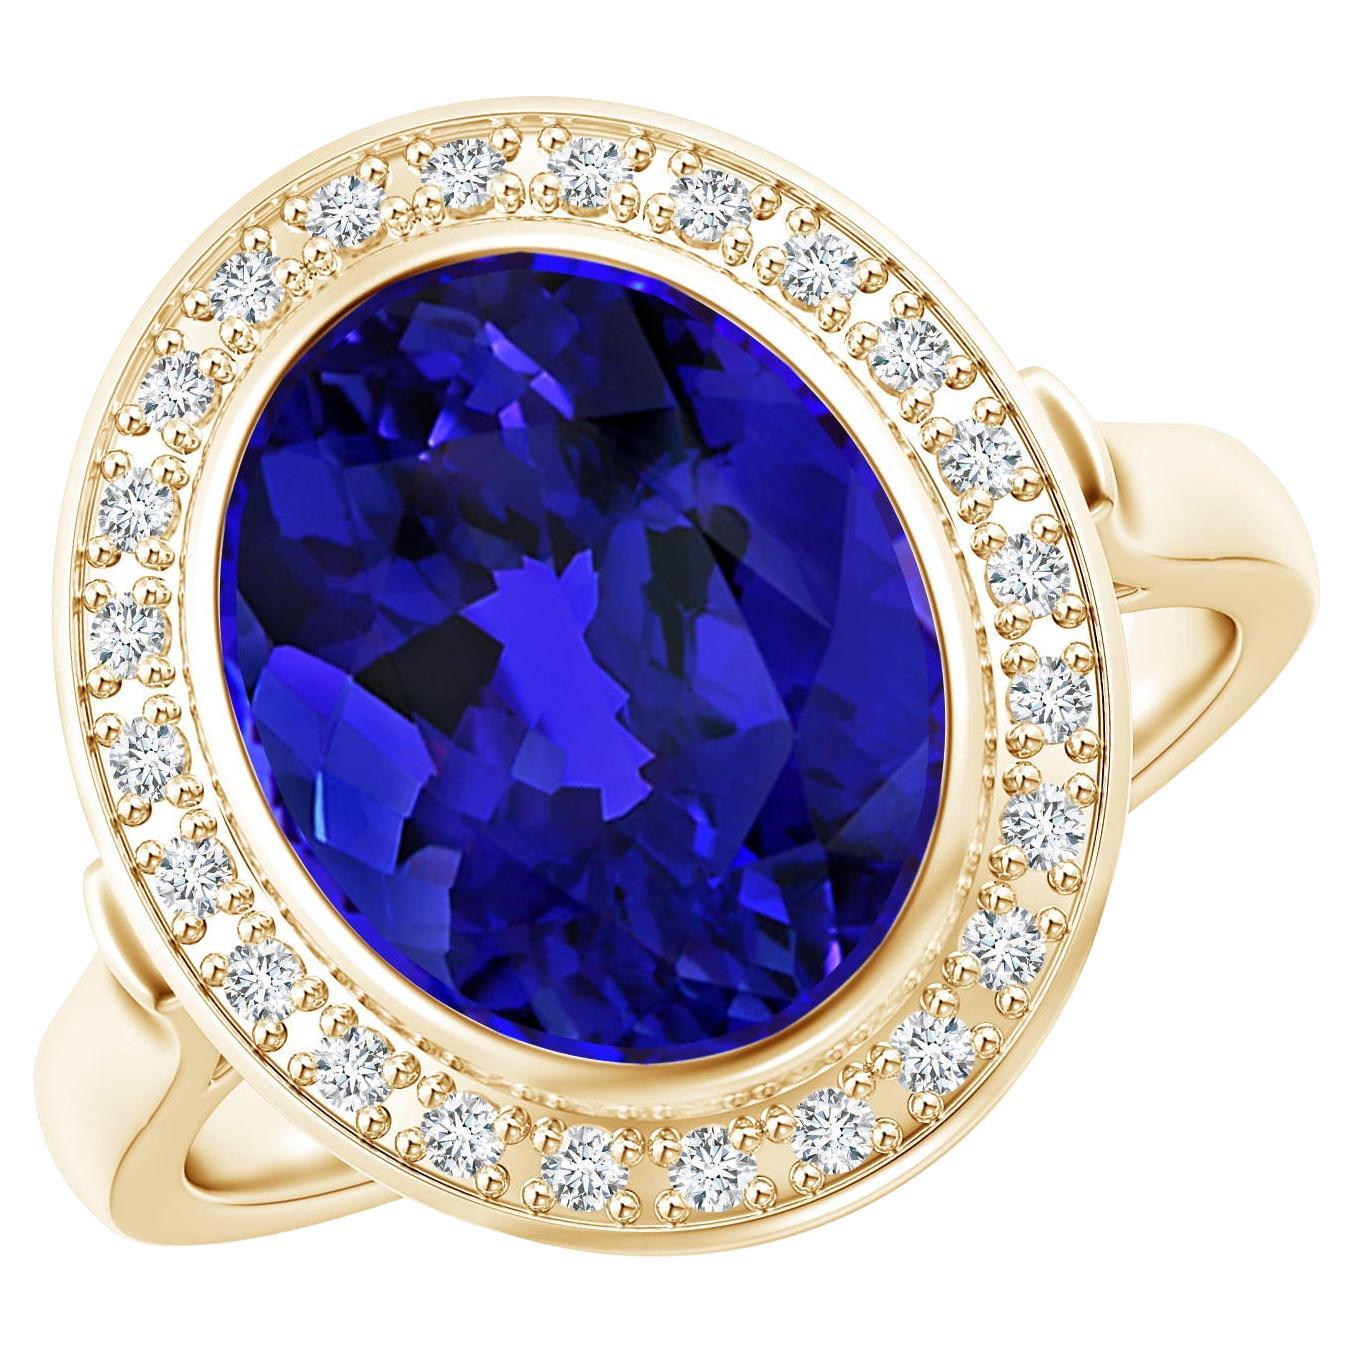 For Sale:  Angara GIA Certified & Appraised Natural Tanzanite Halo Ring in Yellow Gold